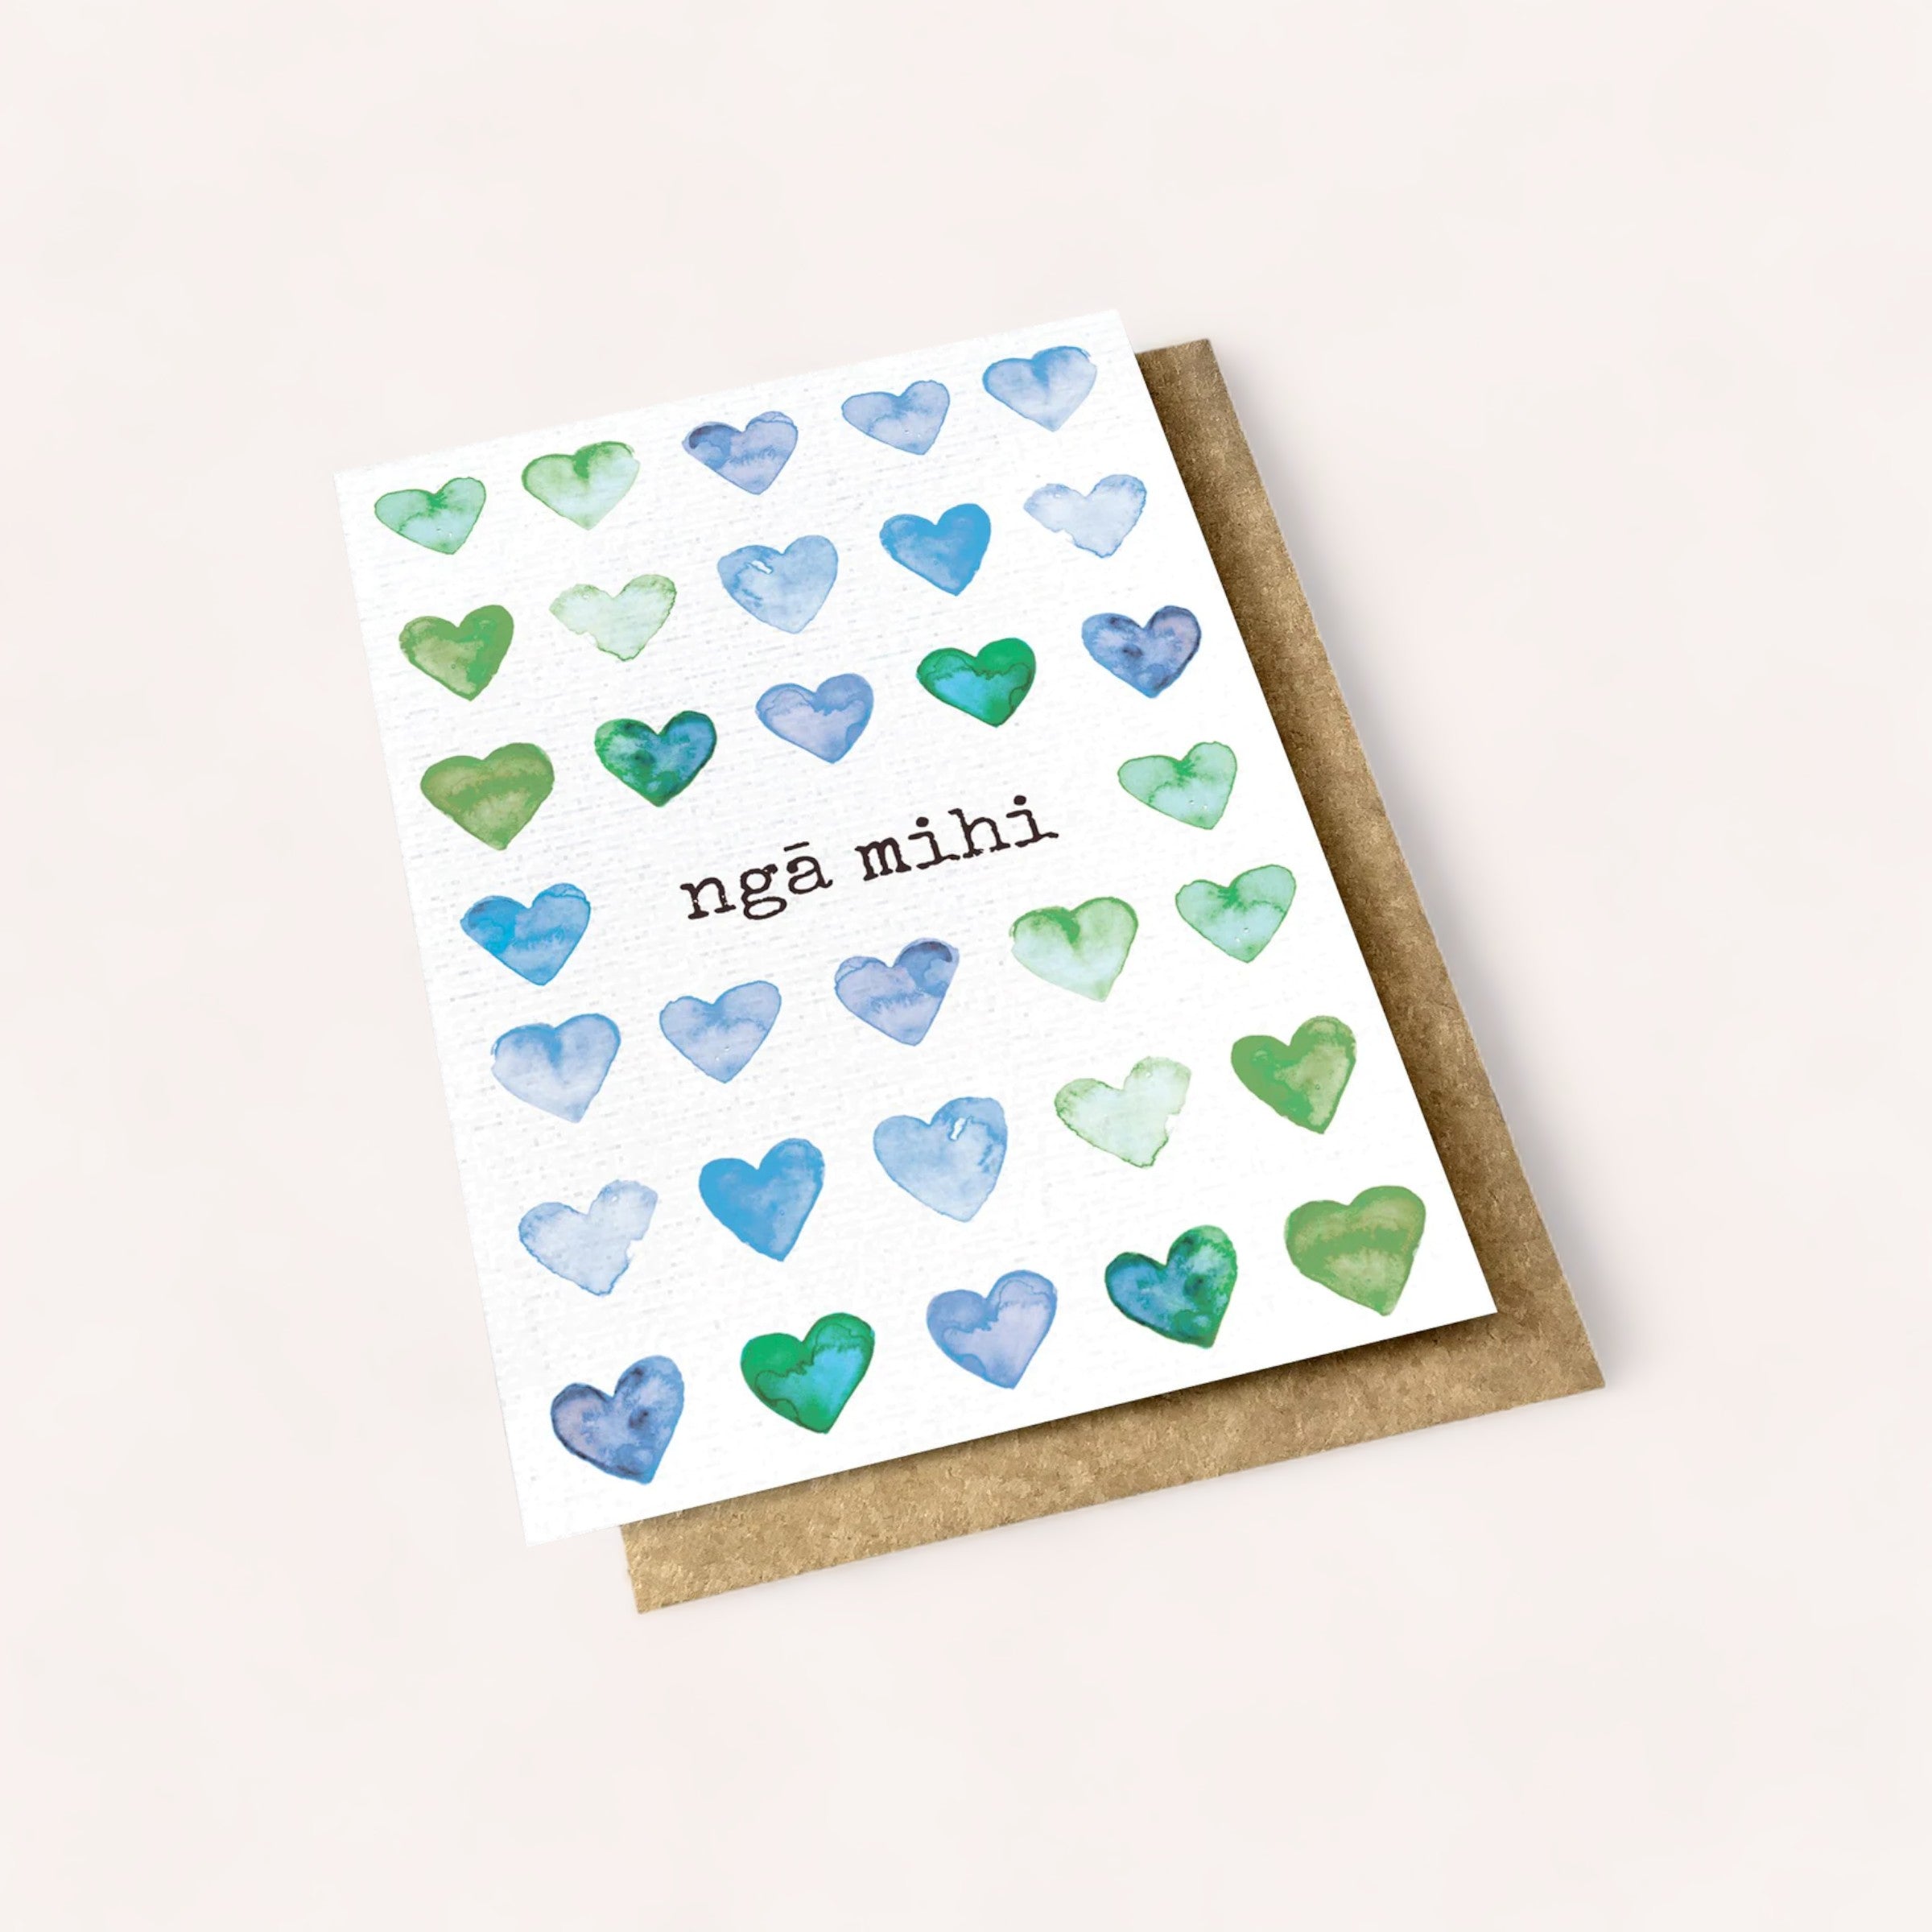 A Nga Mihi Card with watercolor hearts in shades of blue and green, featuring the words "nga mihi" on an off-white background, paired with a kraft paper envelope. This Product of Ink Bomb.